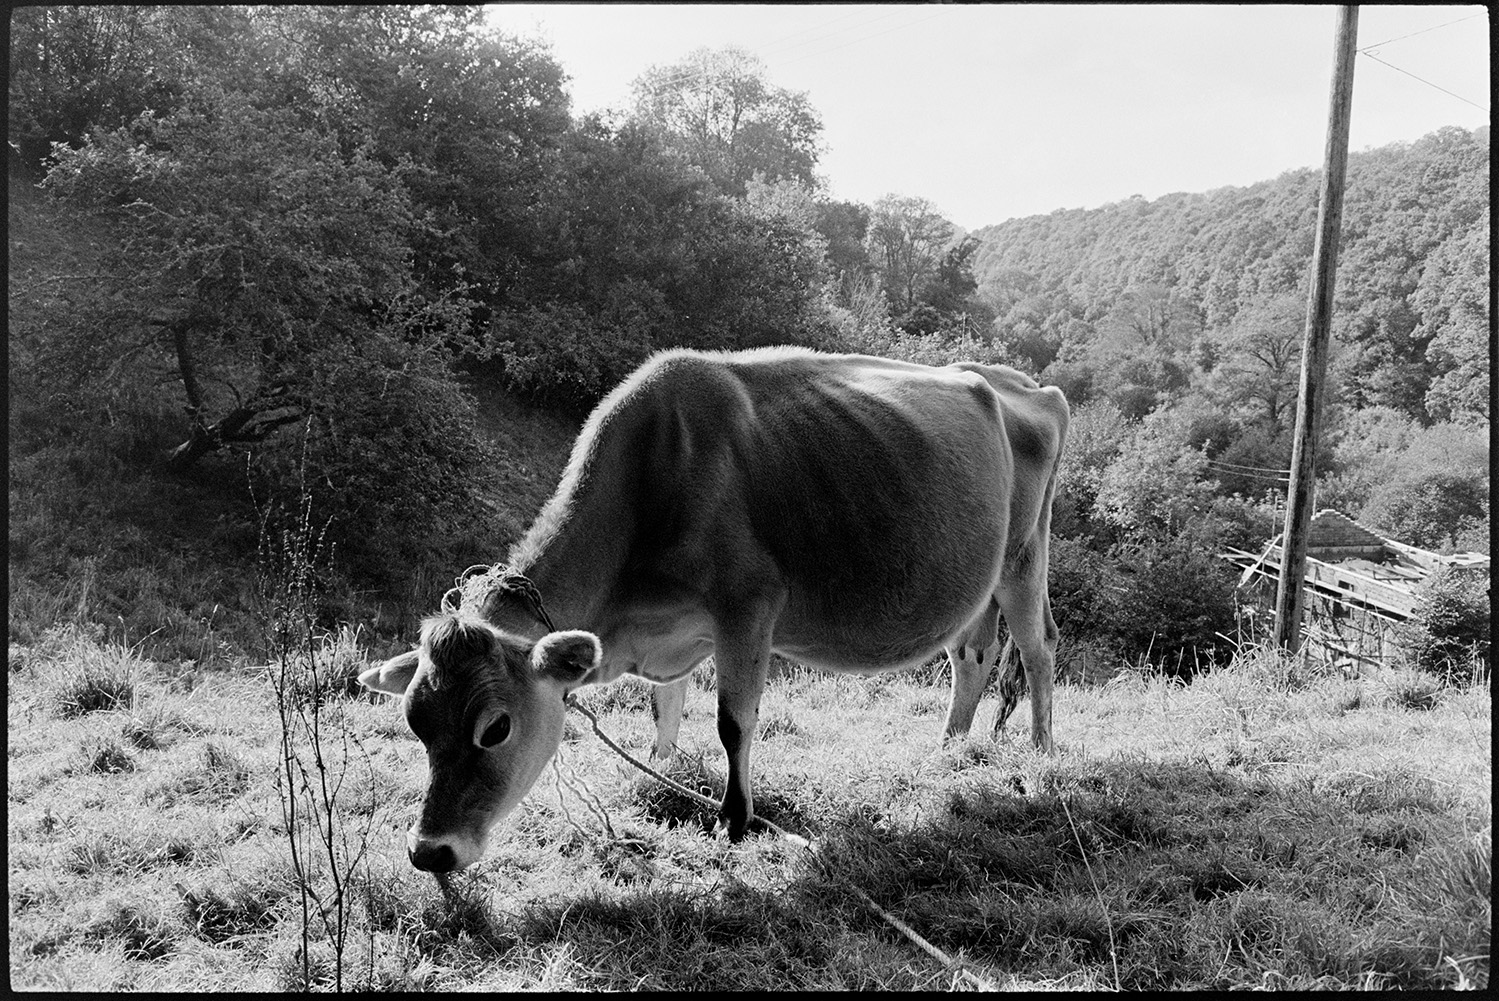 Jersey Cow tethered. 
[A tethered jersey cow grazing in a field at Milhams, Dolton. A roofless buidling with scaffolding and woodland is visible in the background.]